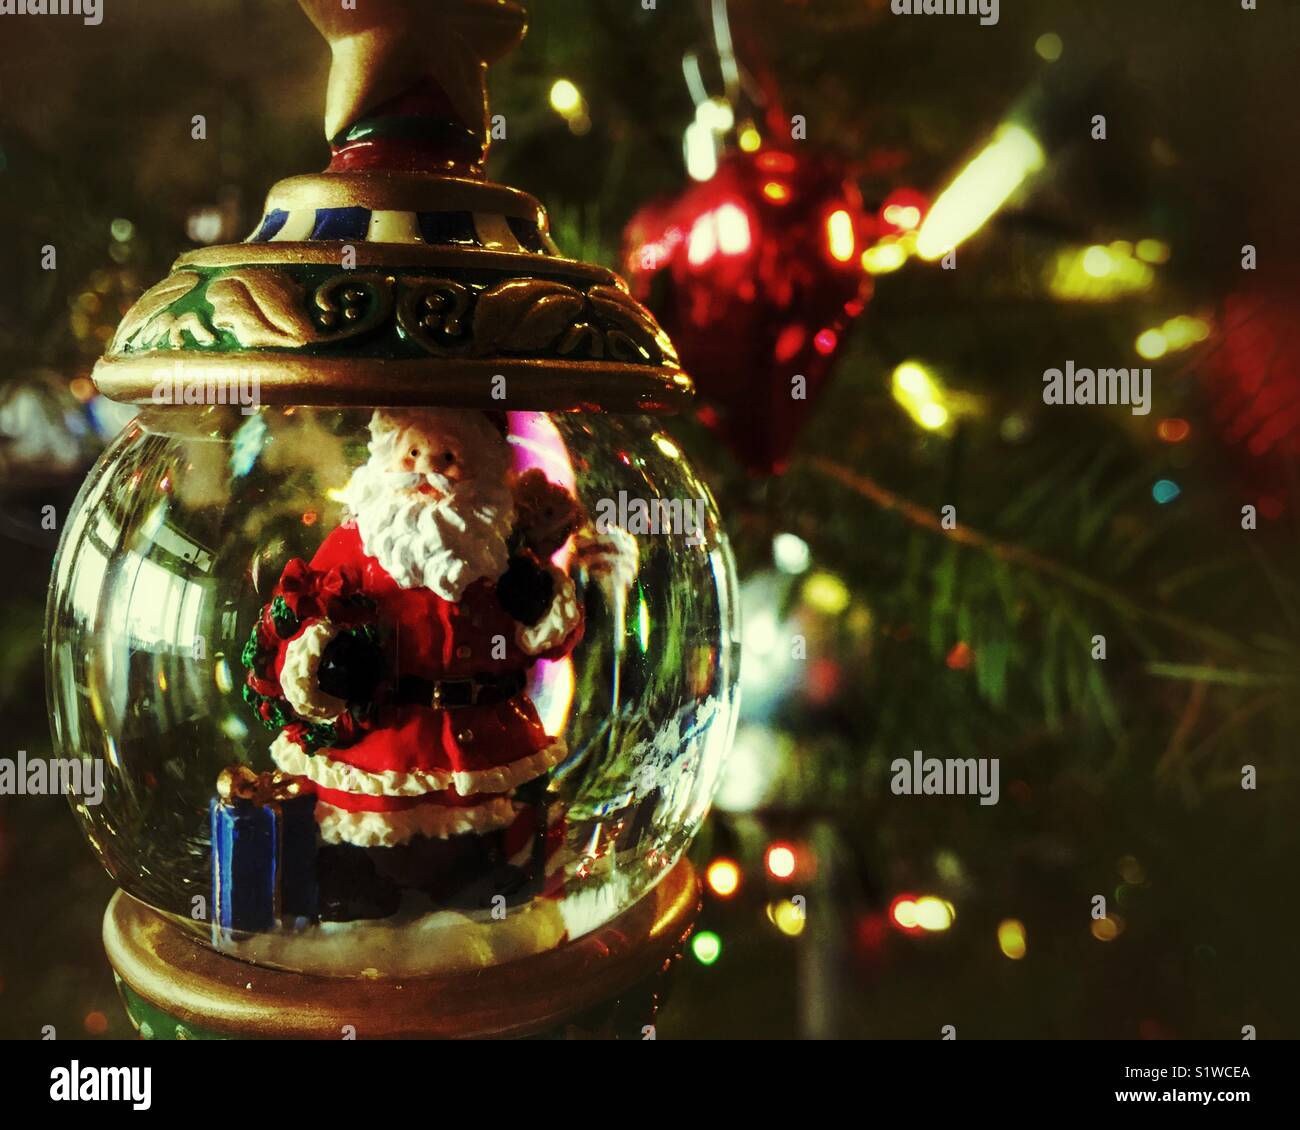 Close up of a Christmas ornament on a Christmas tree. Stock Photo